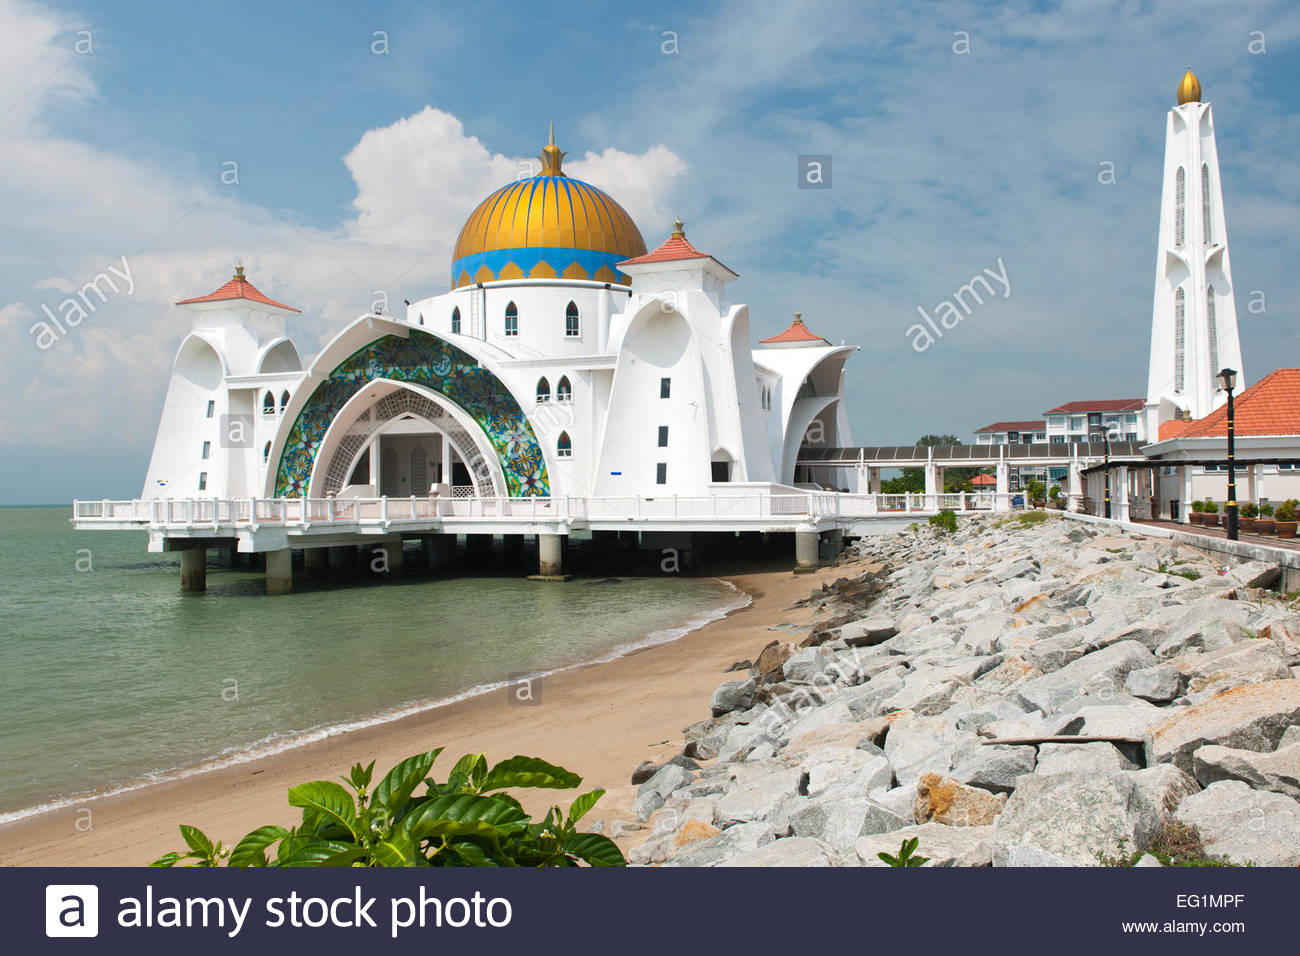 Nice Images Collection: Malacca Straits Mosque Desktop Wallpapers